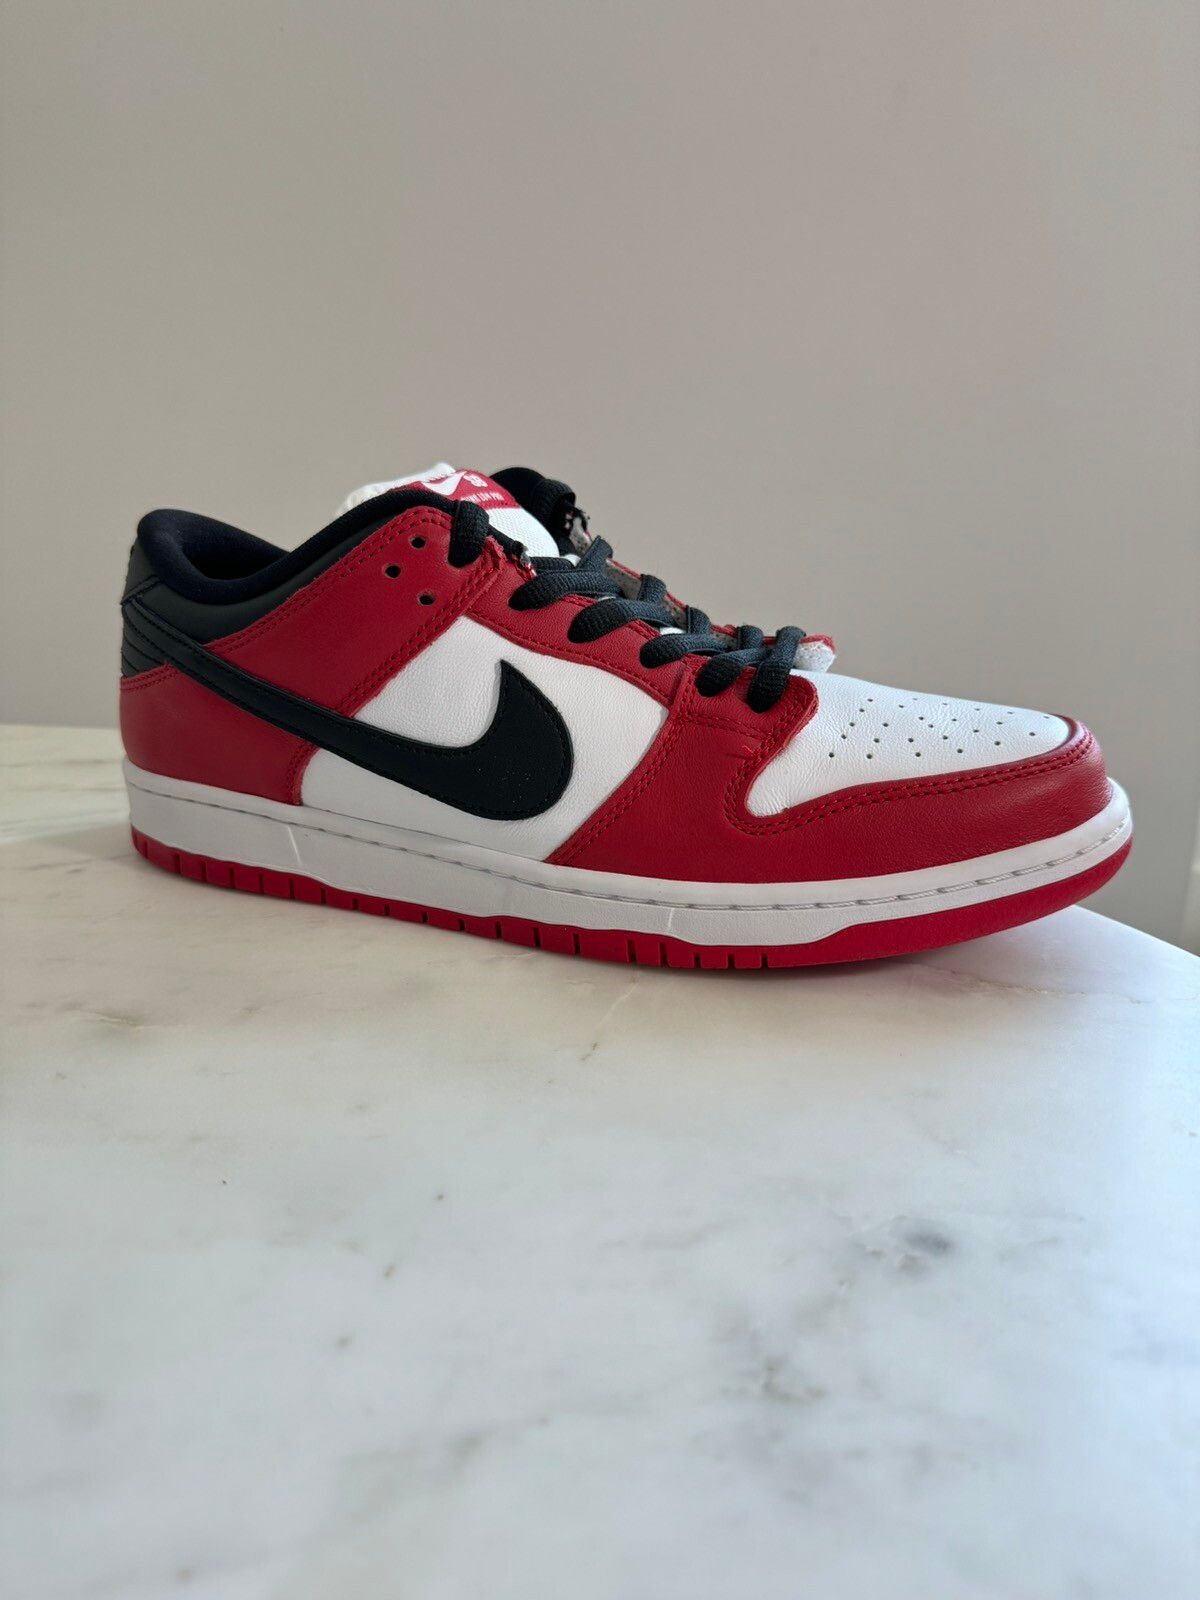 Pre-owned Jordan Nike Sb Dunk Low Pro J Pack Chicago (2020) Shoes In Red